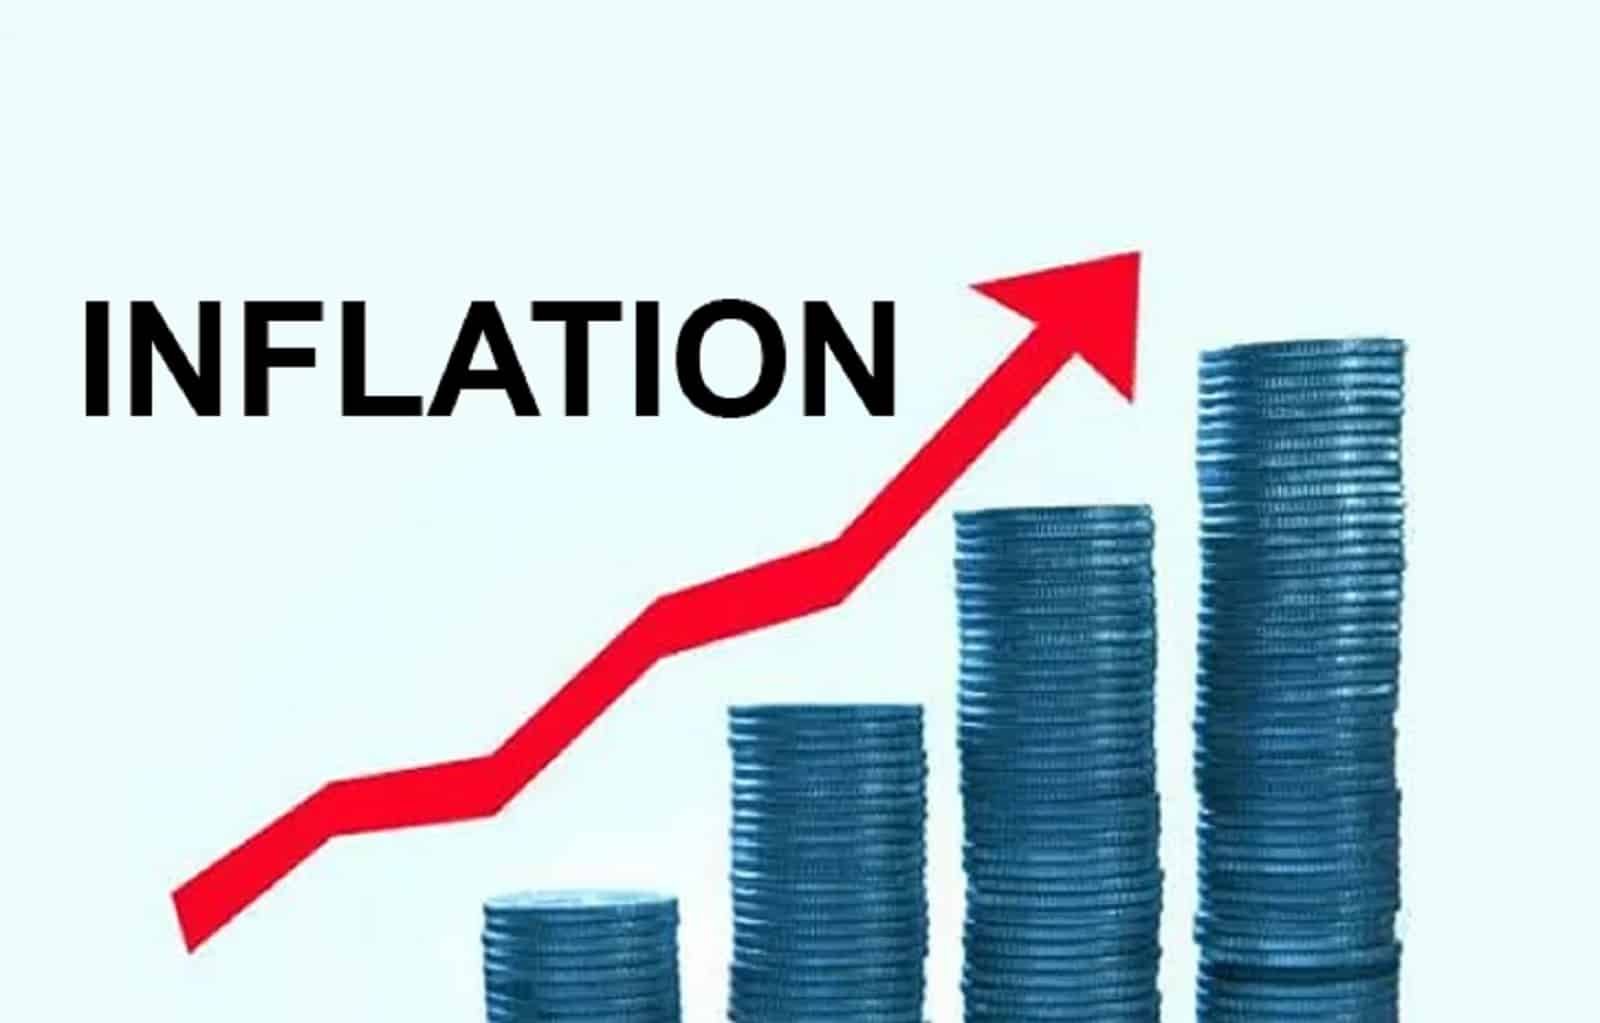 Nigeria’s Inflation Rate Rises To 21.91% – NBS